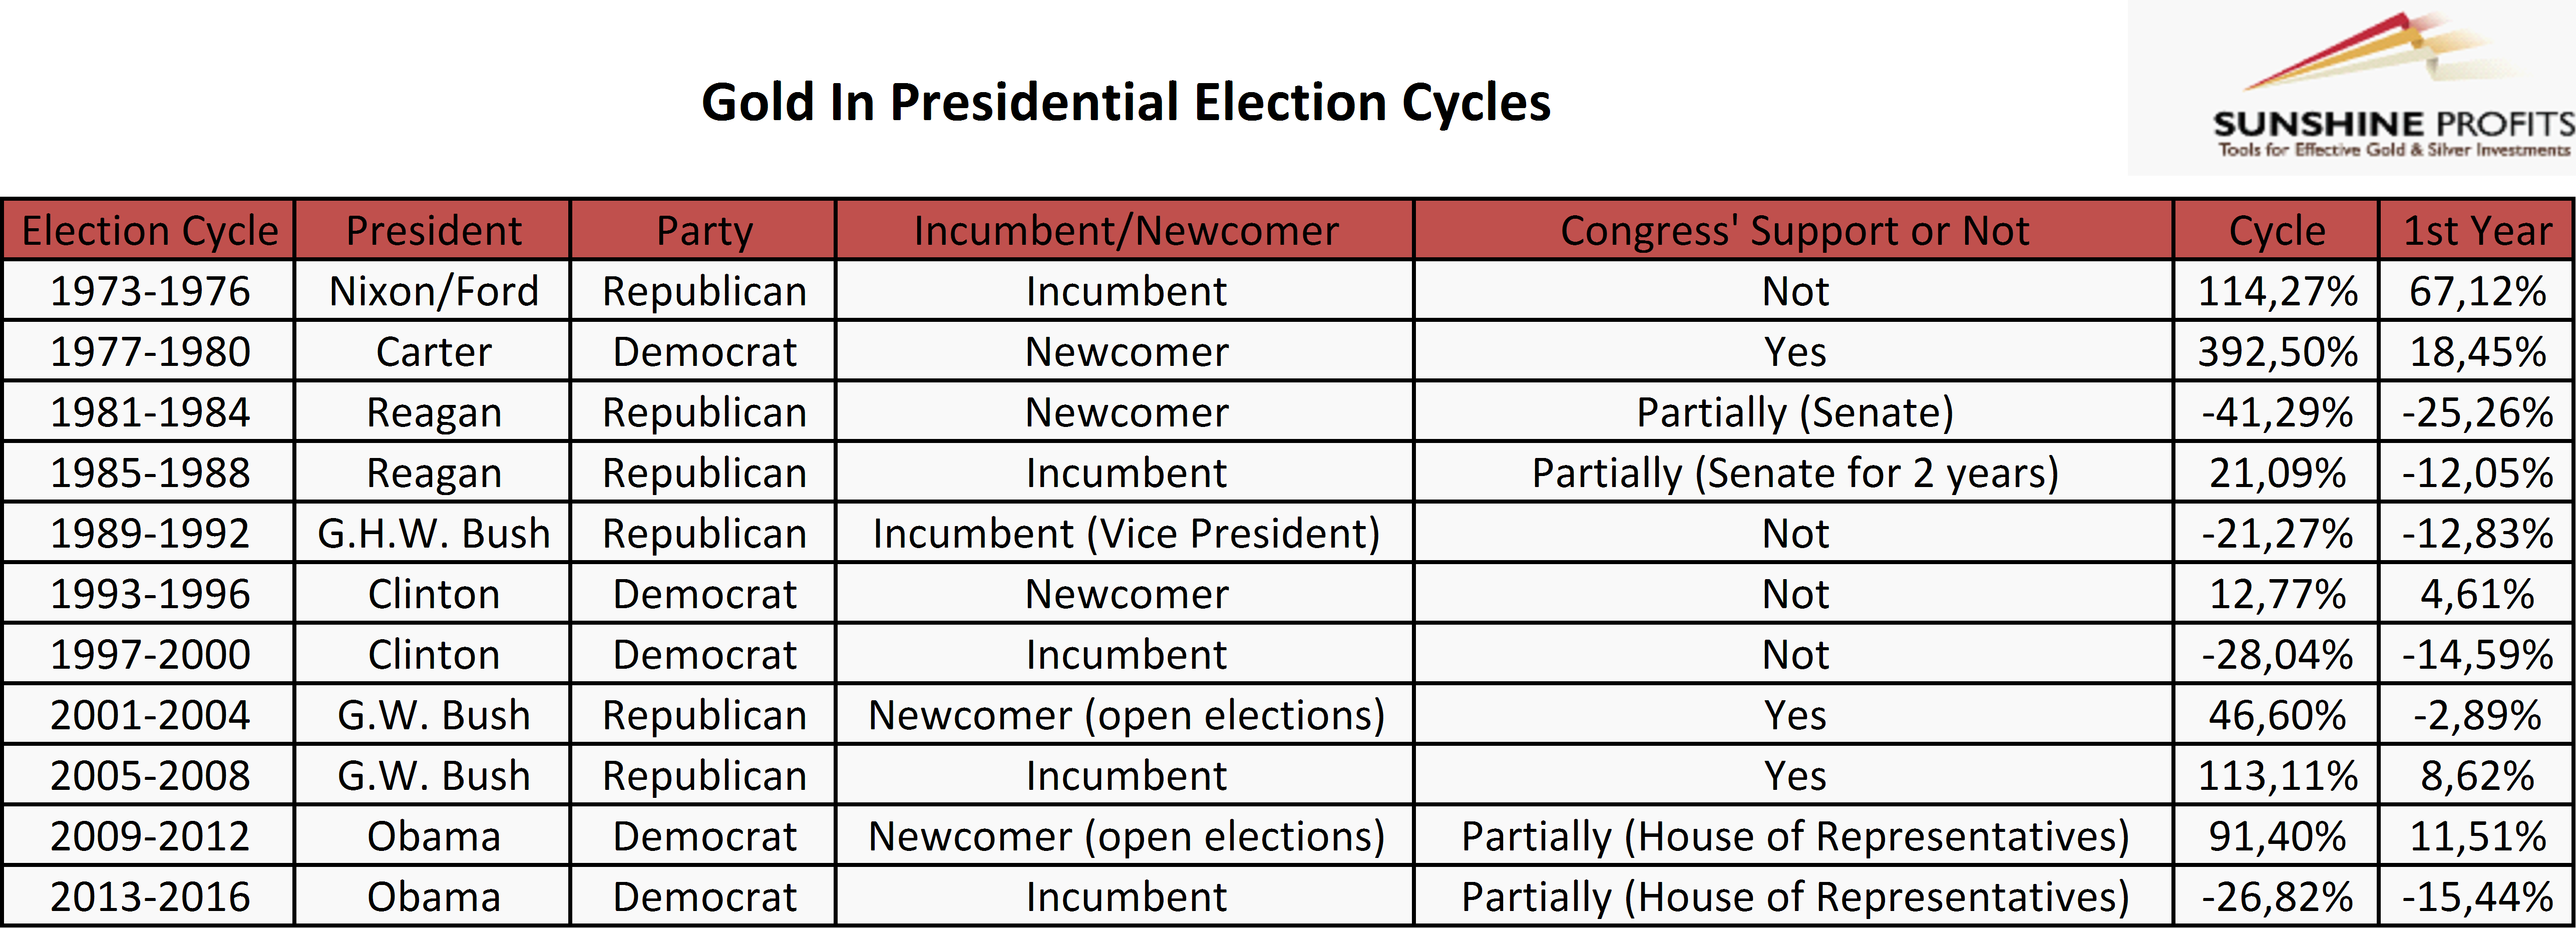 Gold’s performance in presidential election cycles between 1973 and 2016